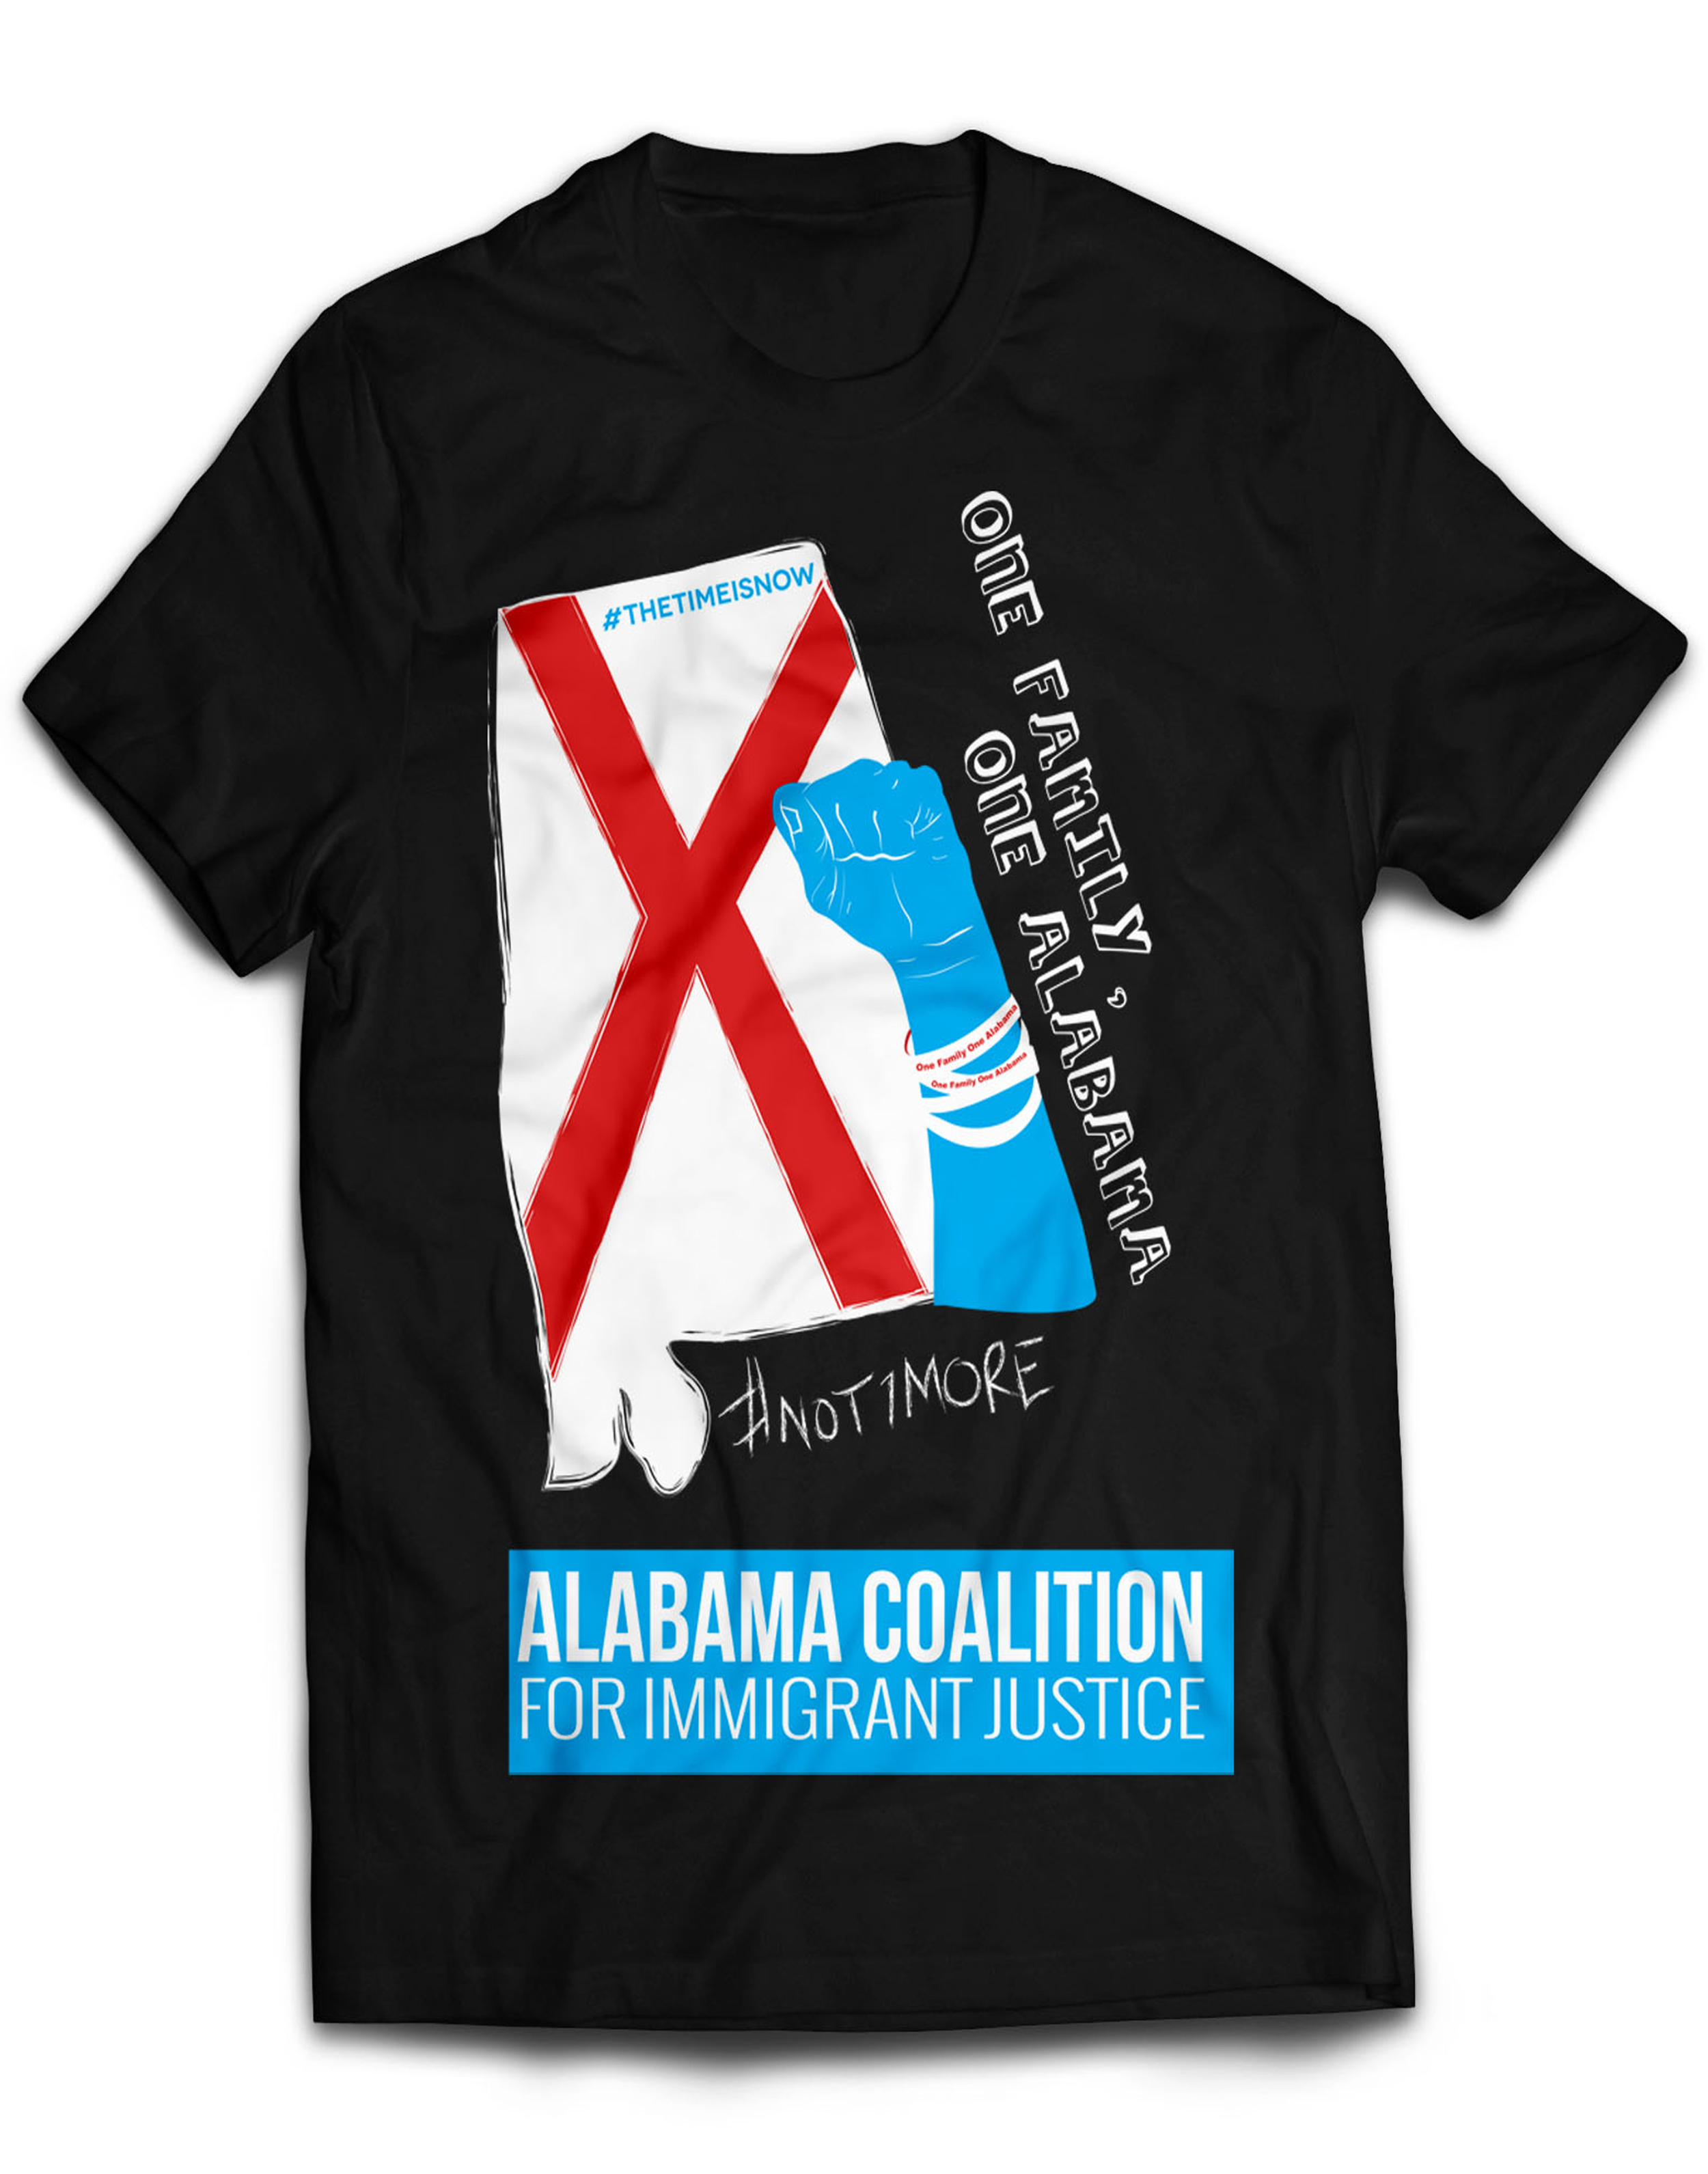  Client: Alabama Coalition for Immigrant Justice  Type: Shirt 